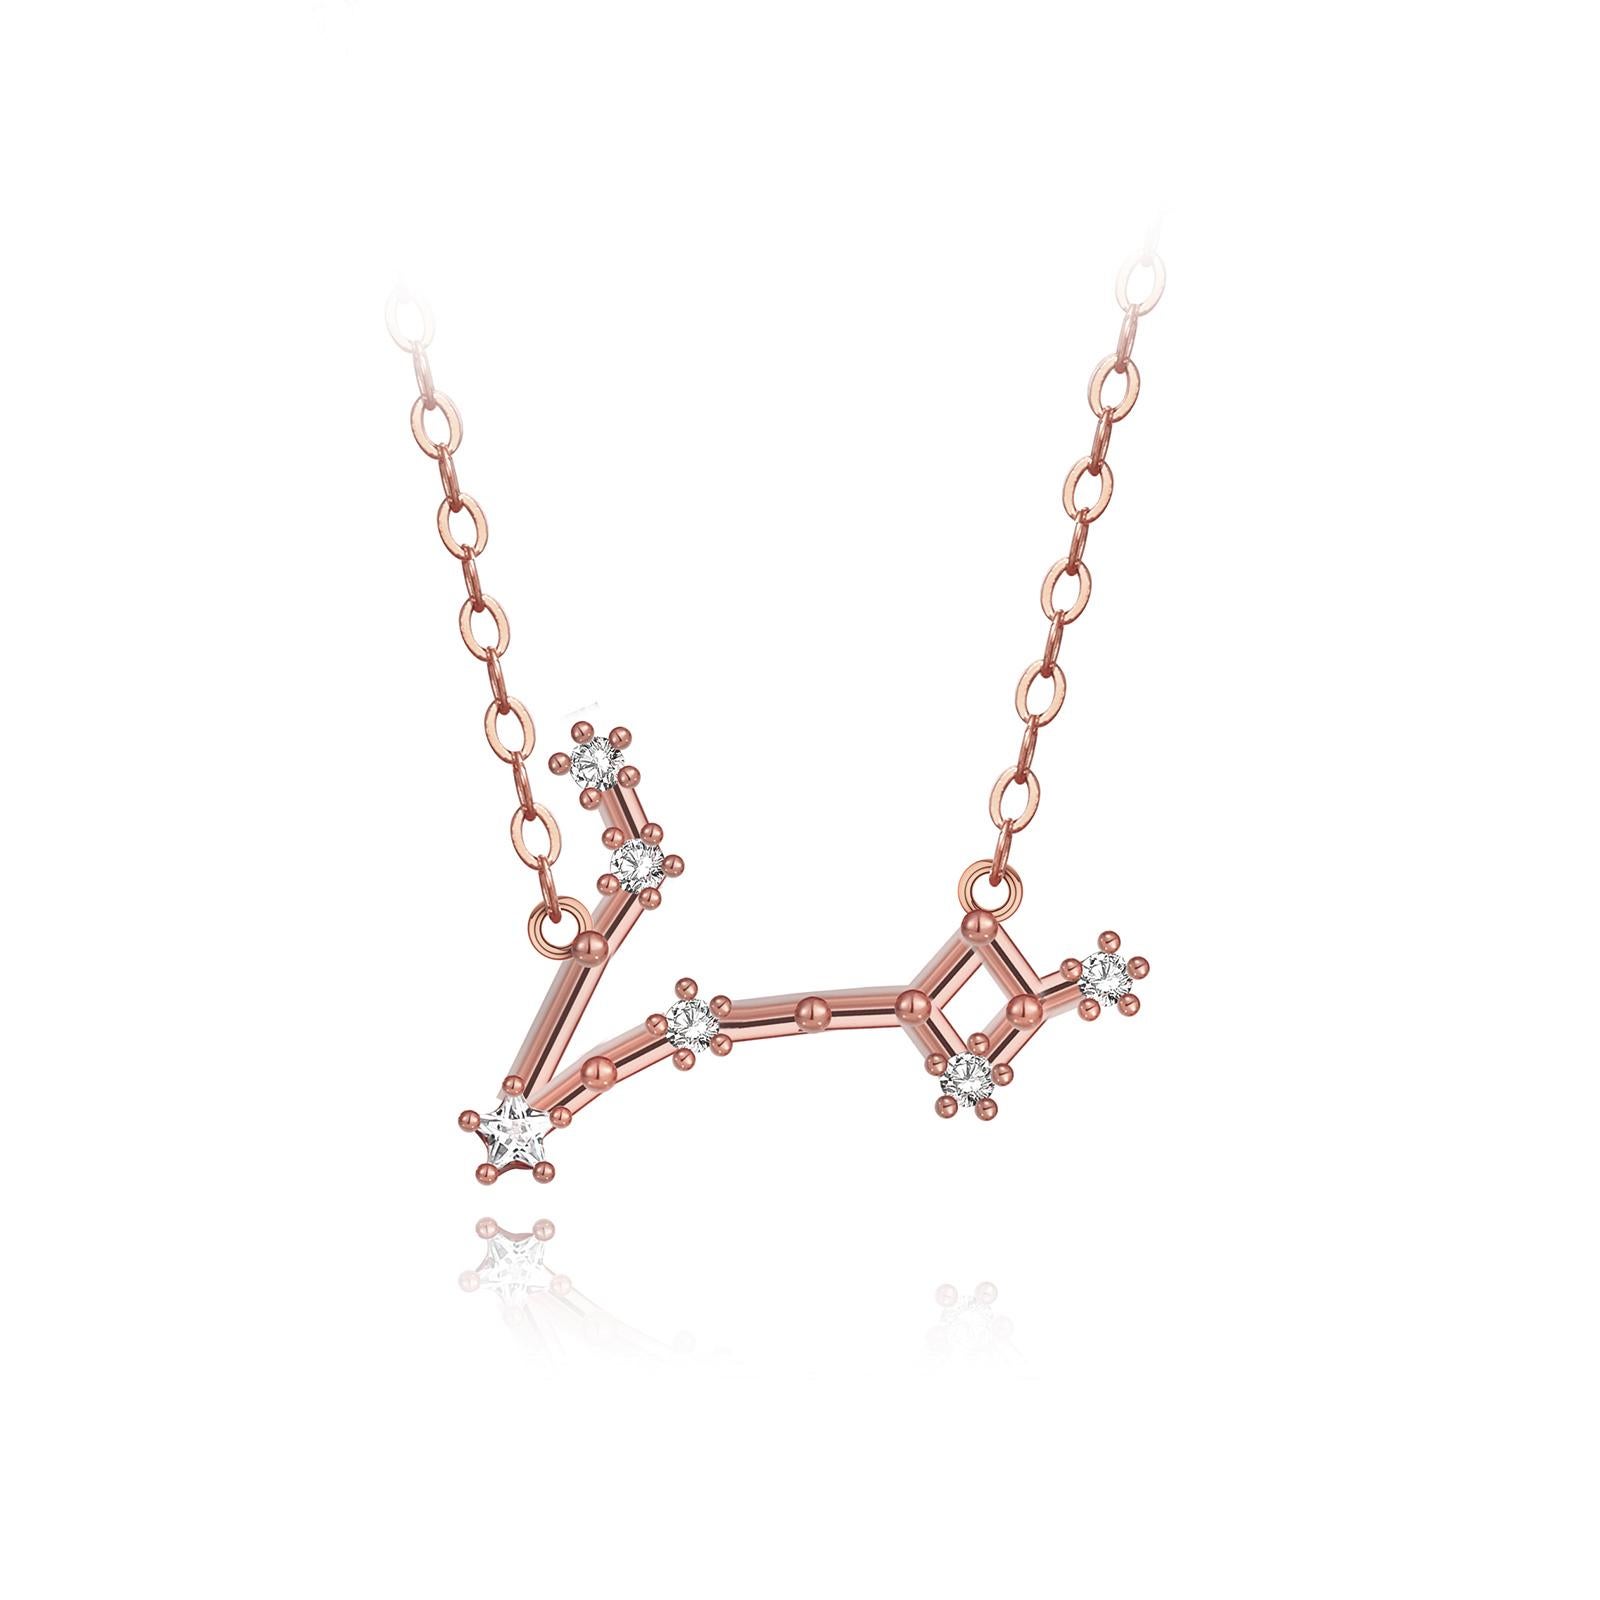 You are unique and your zodiac tells part of your story.  How your zodiac is displayed in the beautiful nighttime sky is what we want you to carry with you always. This pisces star constellation necklace shares a part of your personality with us all